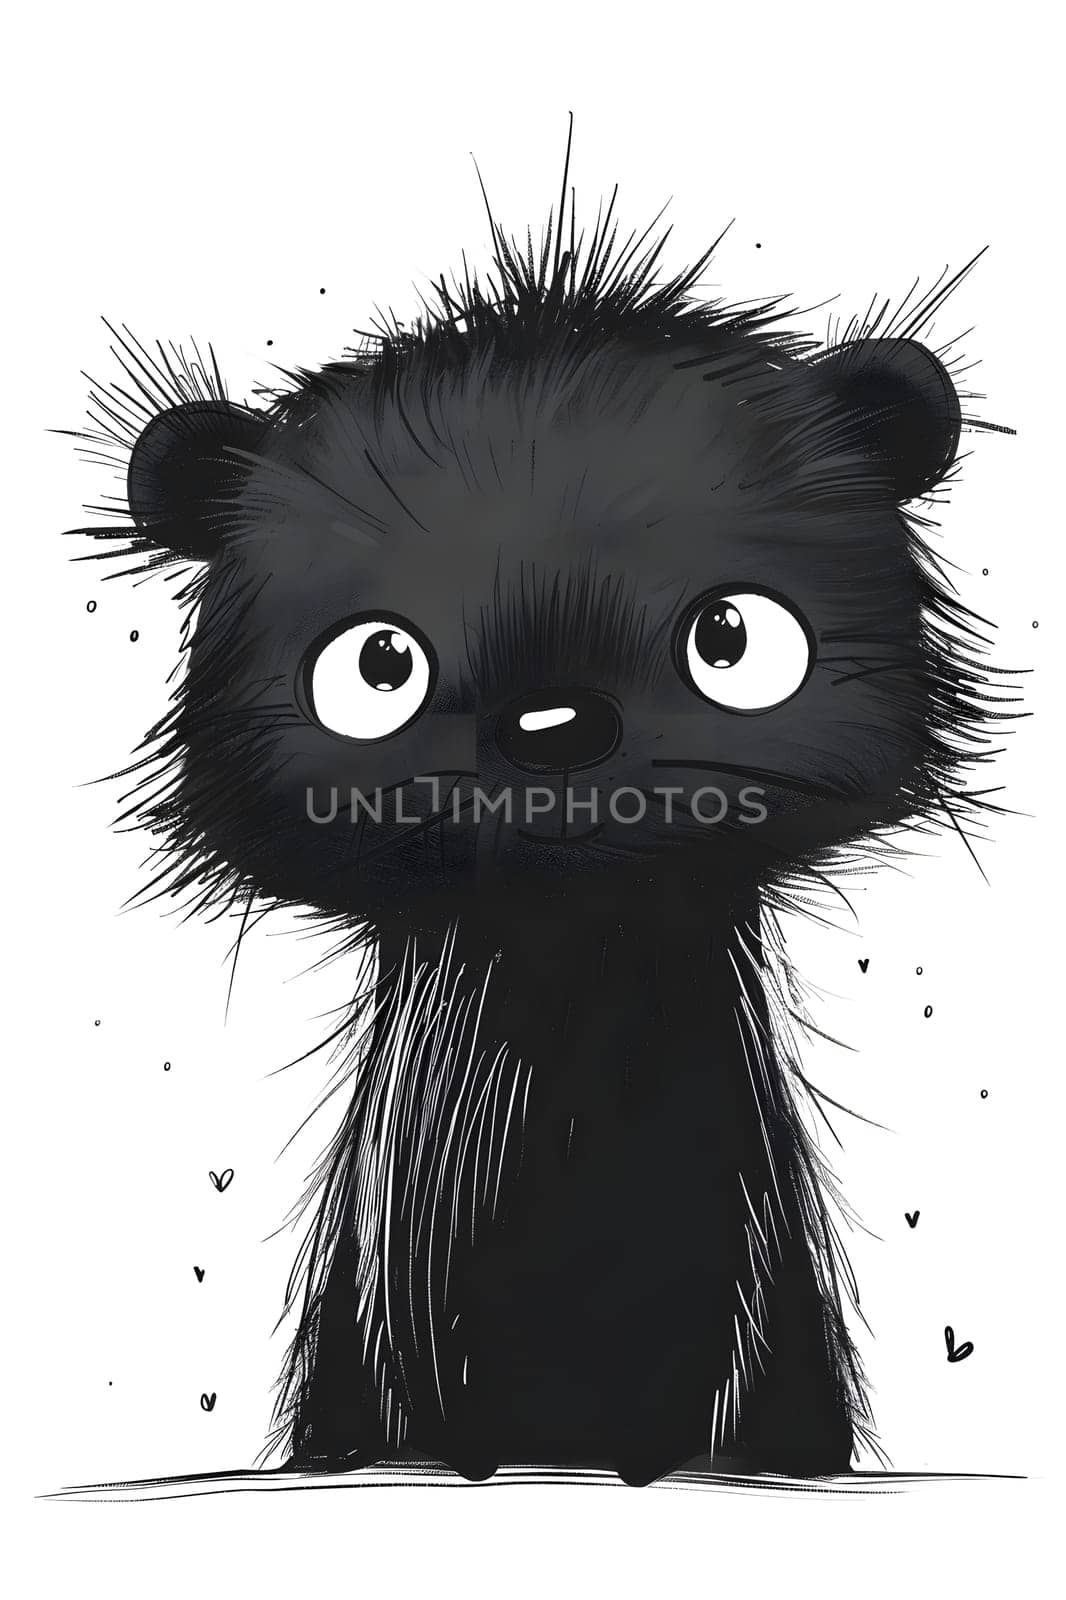 A toysized black Felidae cat with big eyes, whiskers, and fur is sitting on a white surface. Its gesture, snout, tail, and small size make it a charming subject for art